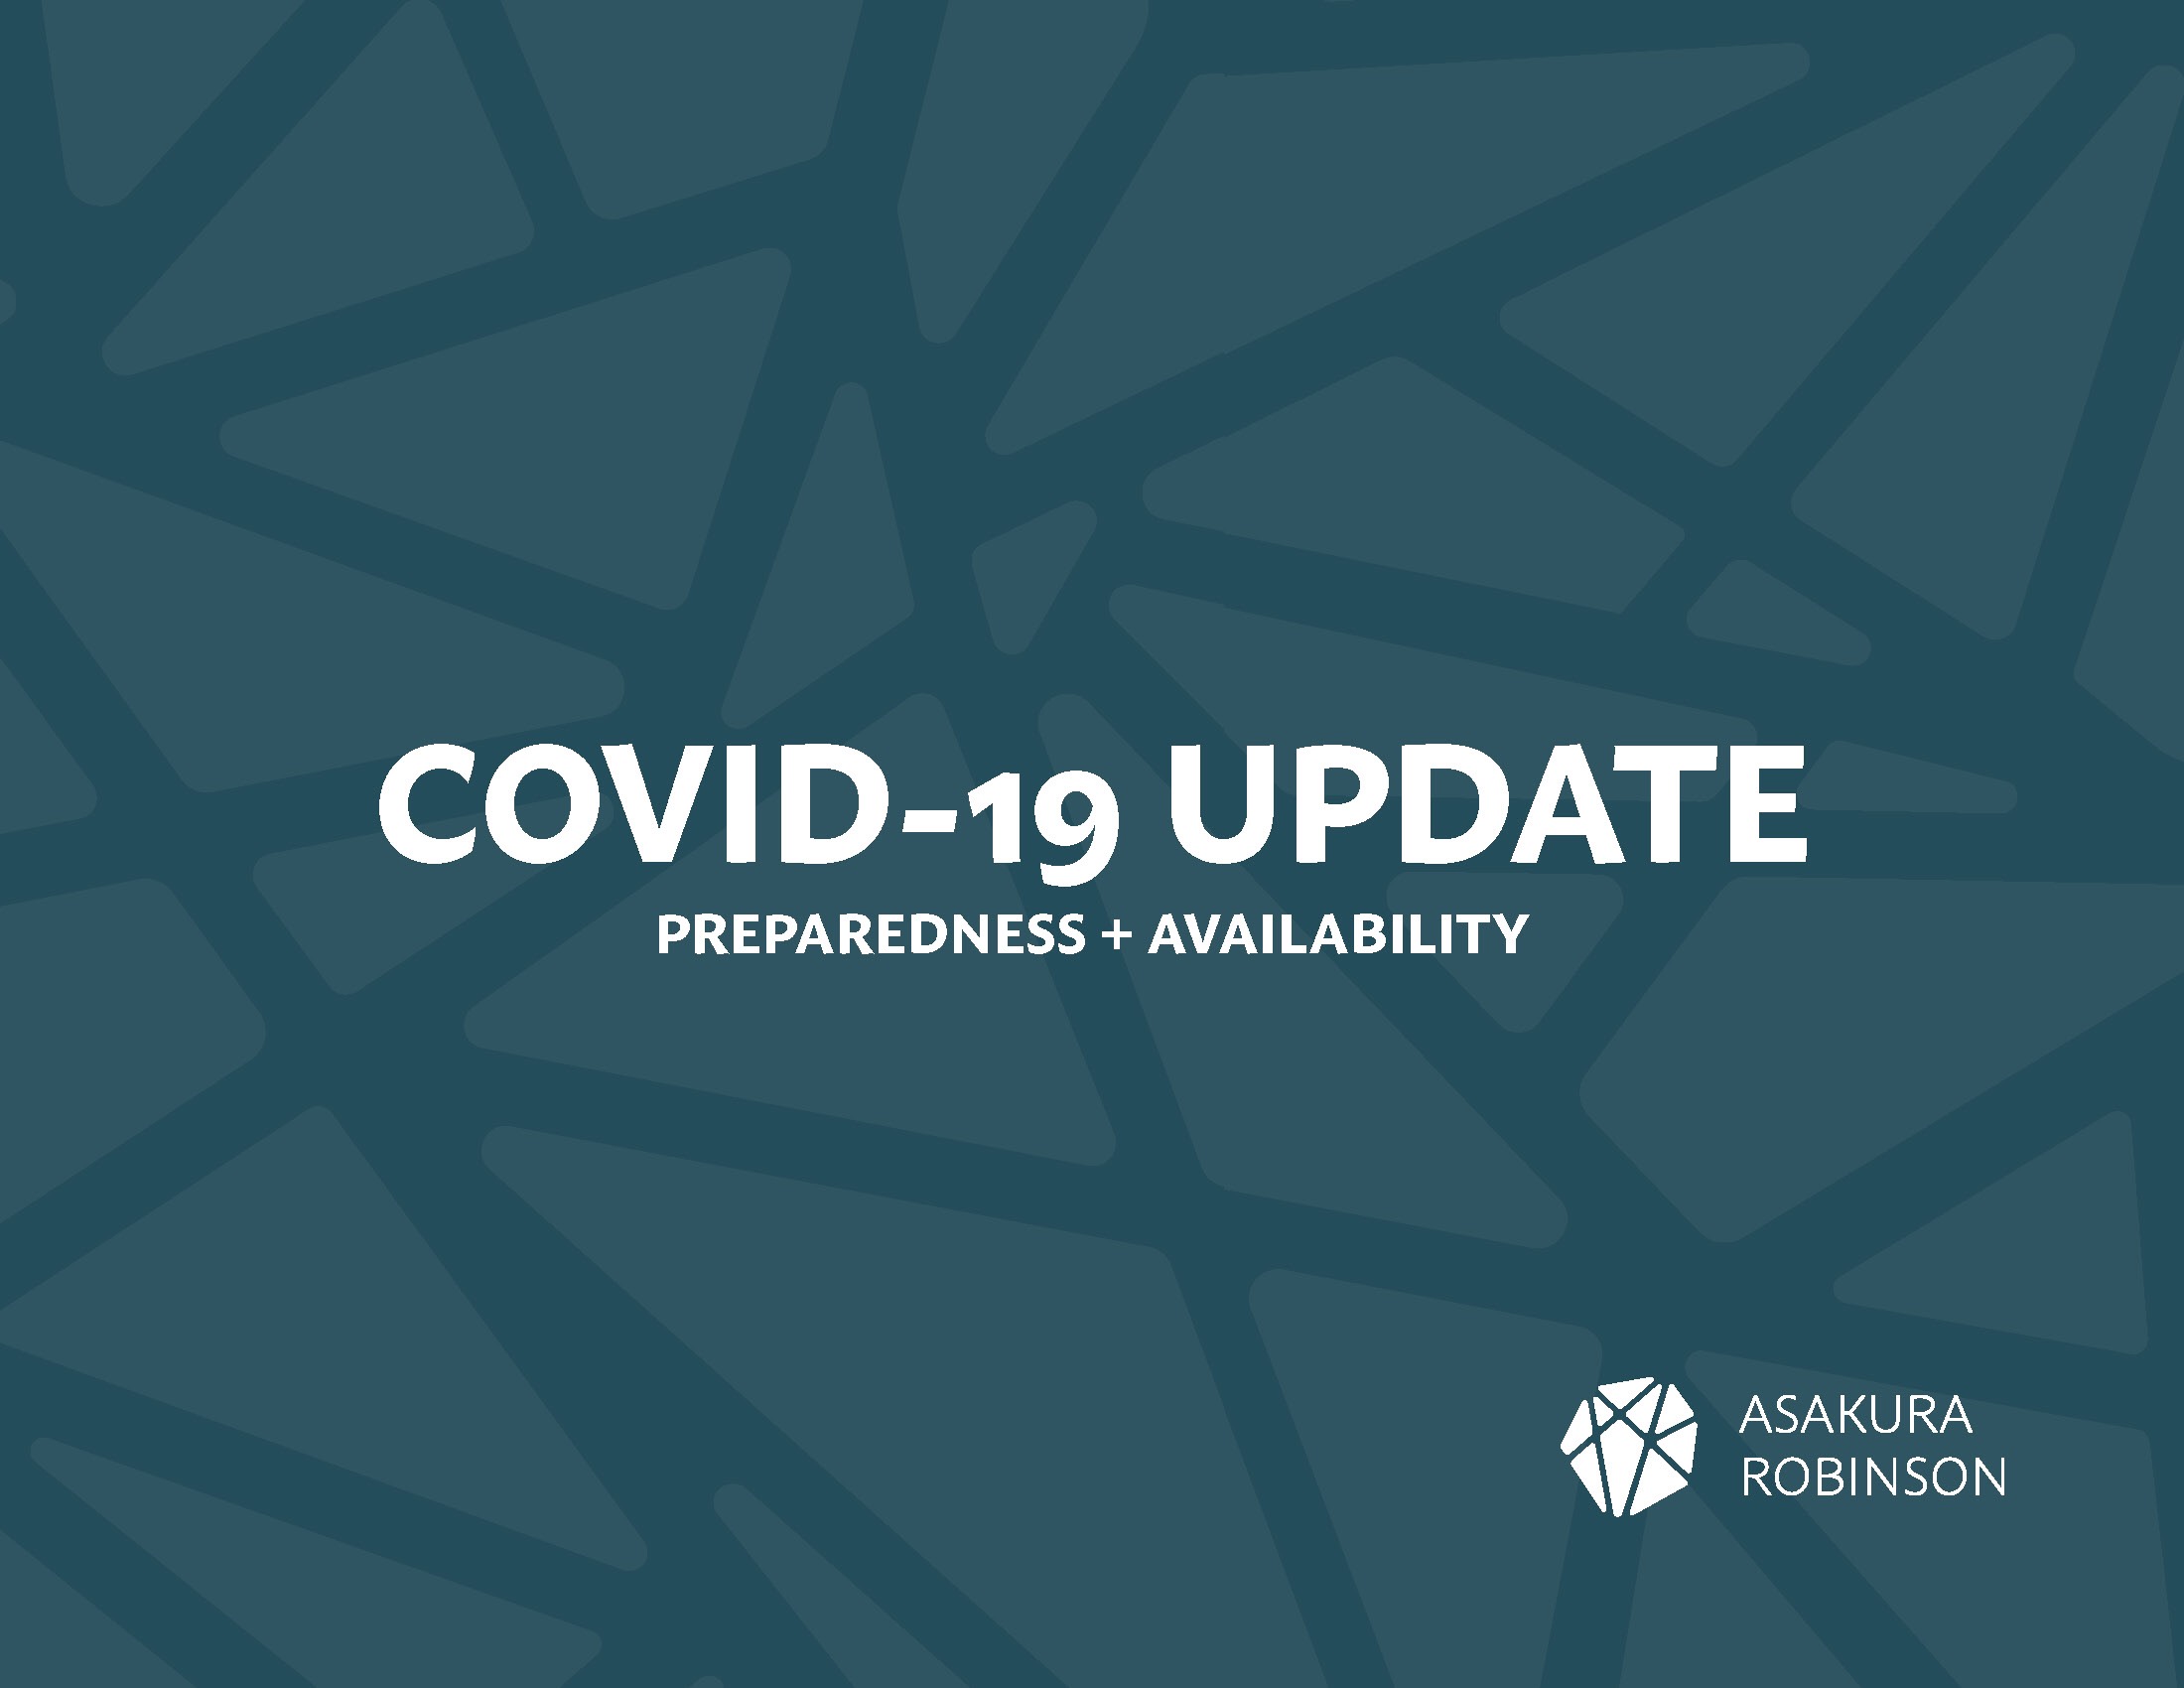 COVID-19 Preparedness and Availability: Updated